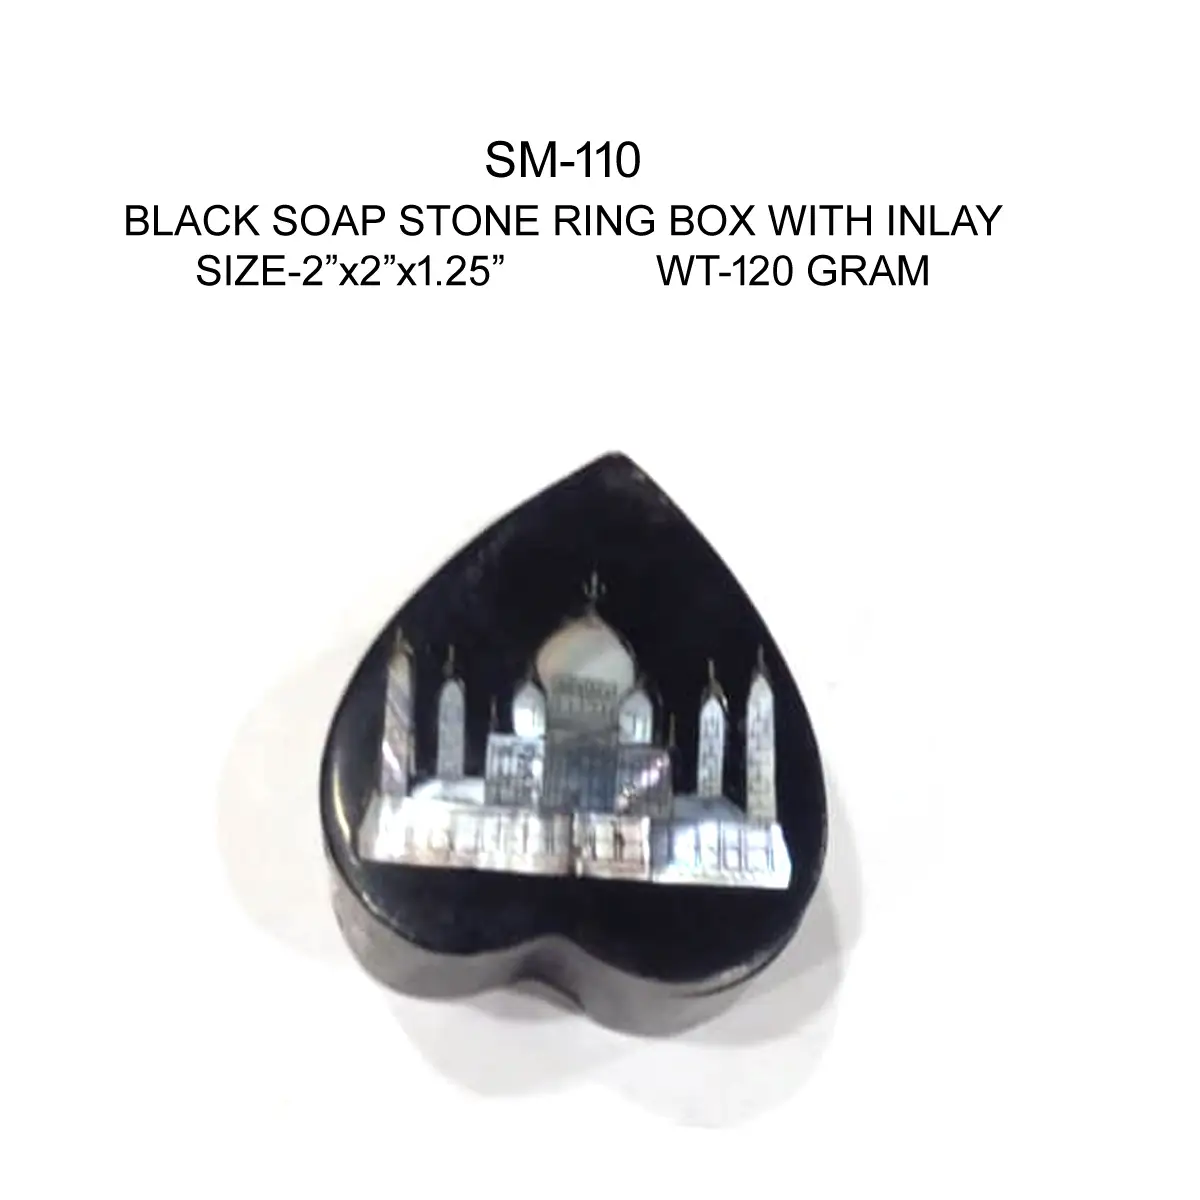 BLACK SOAP STONE RING BOX WITH INLAY